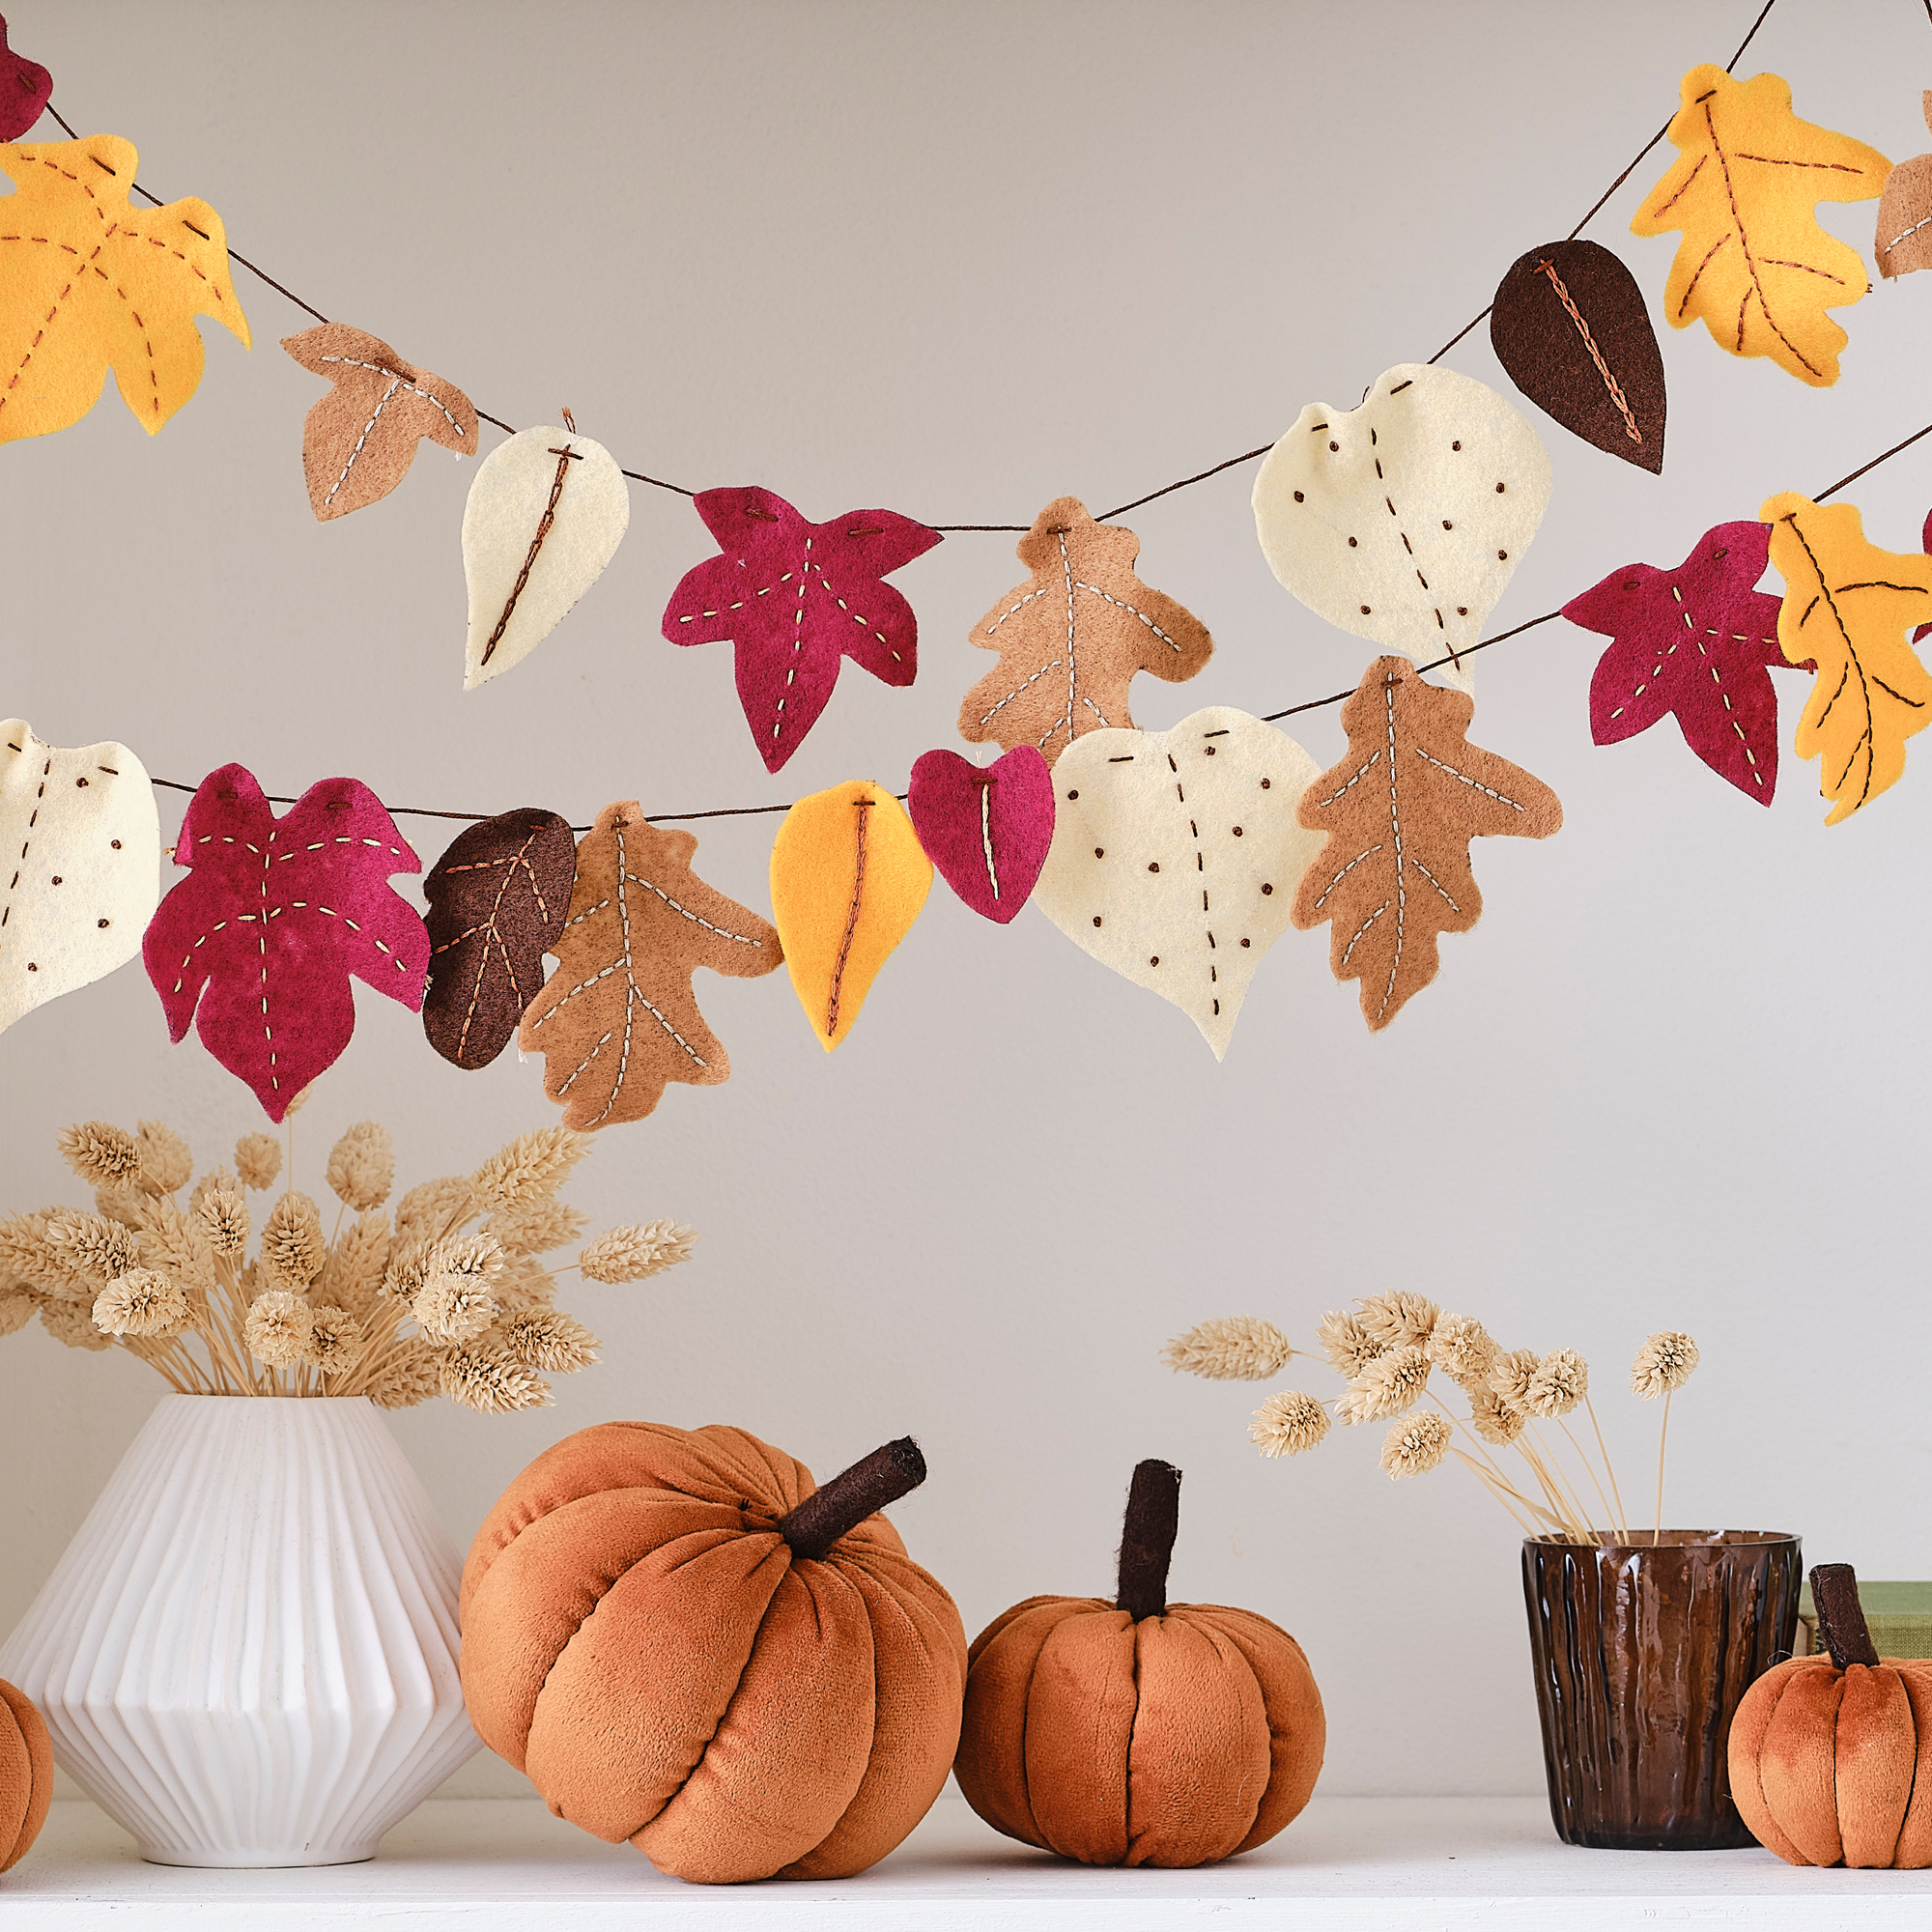 How To Make A Fall Leaf Garland: An Inexpensive Craft Idea